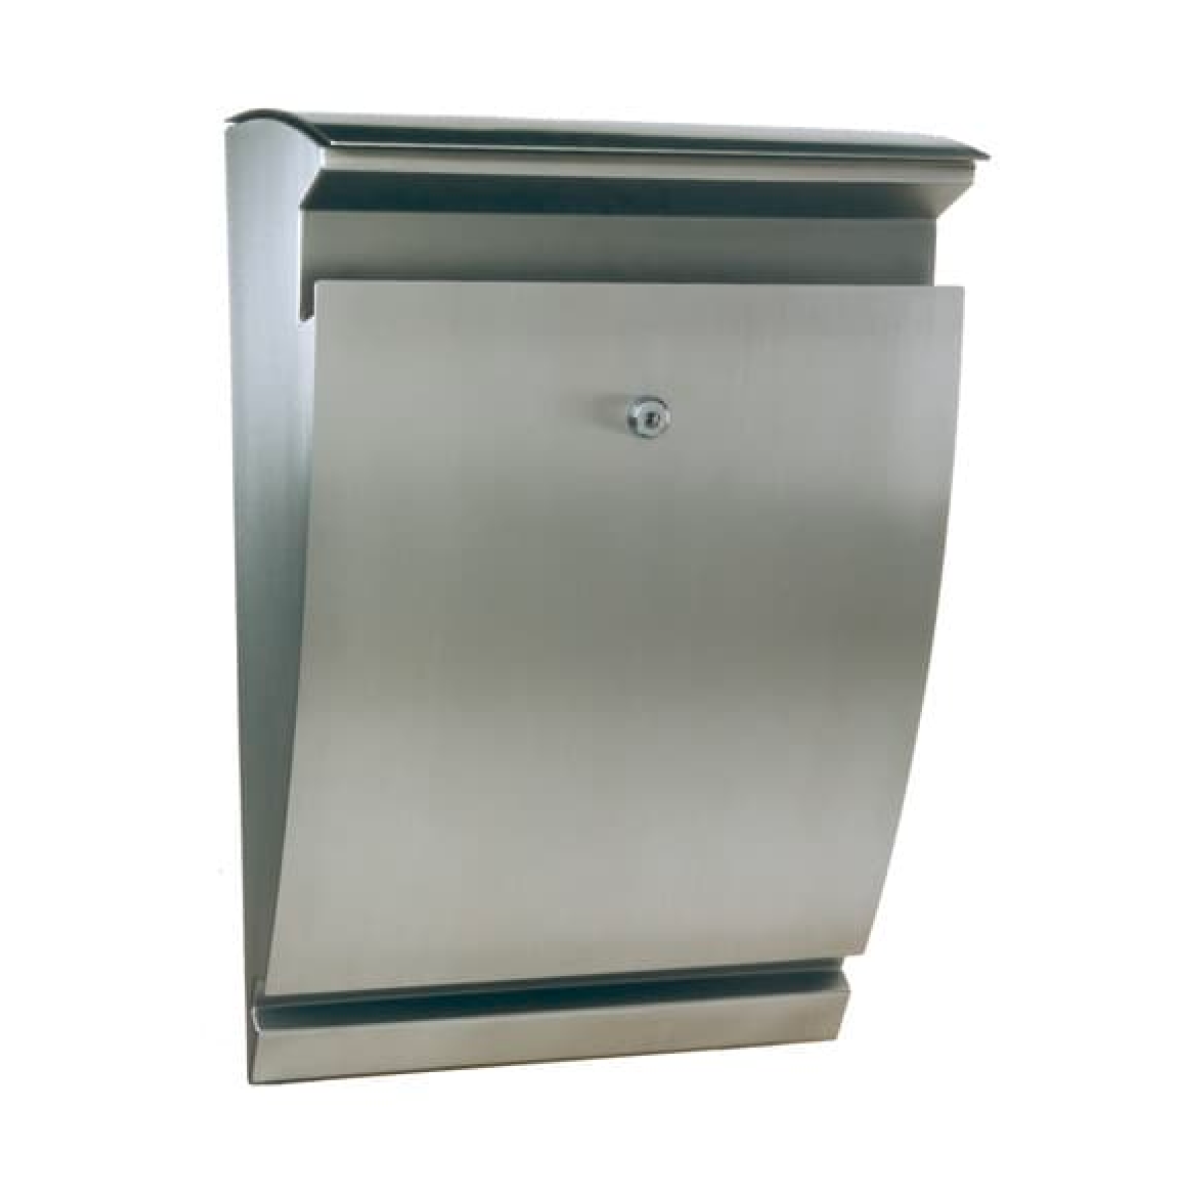 European Home Arcturus Wall Mount Mailbox Product Image